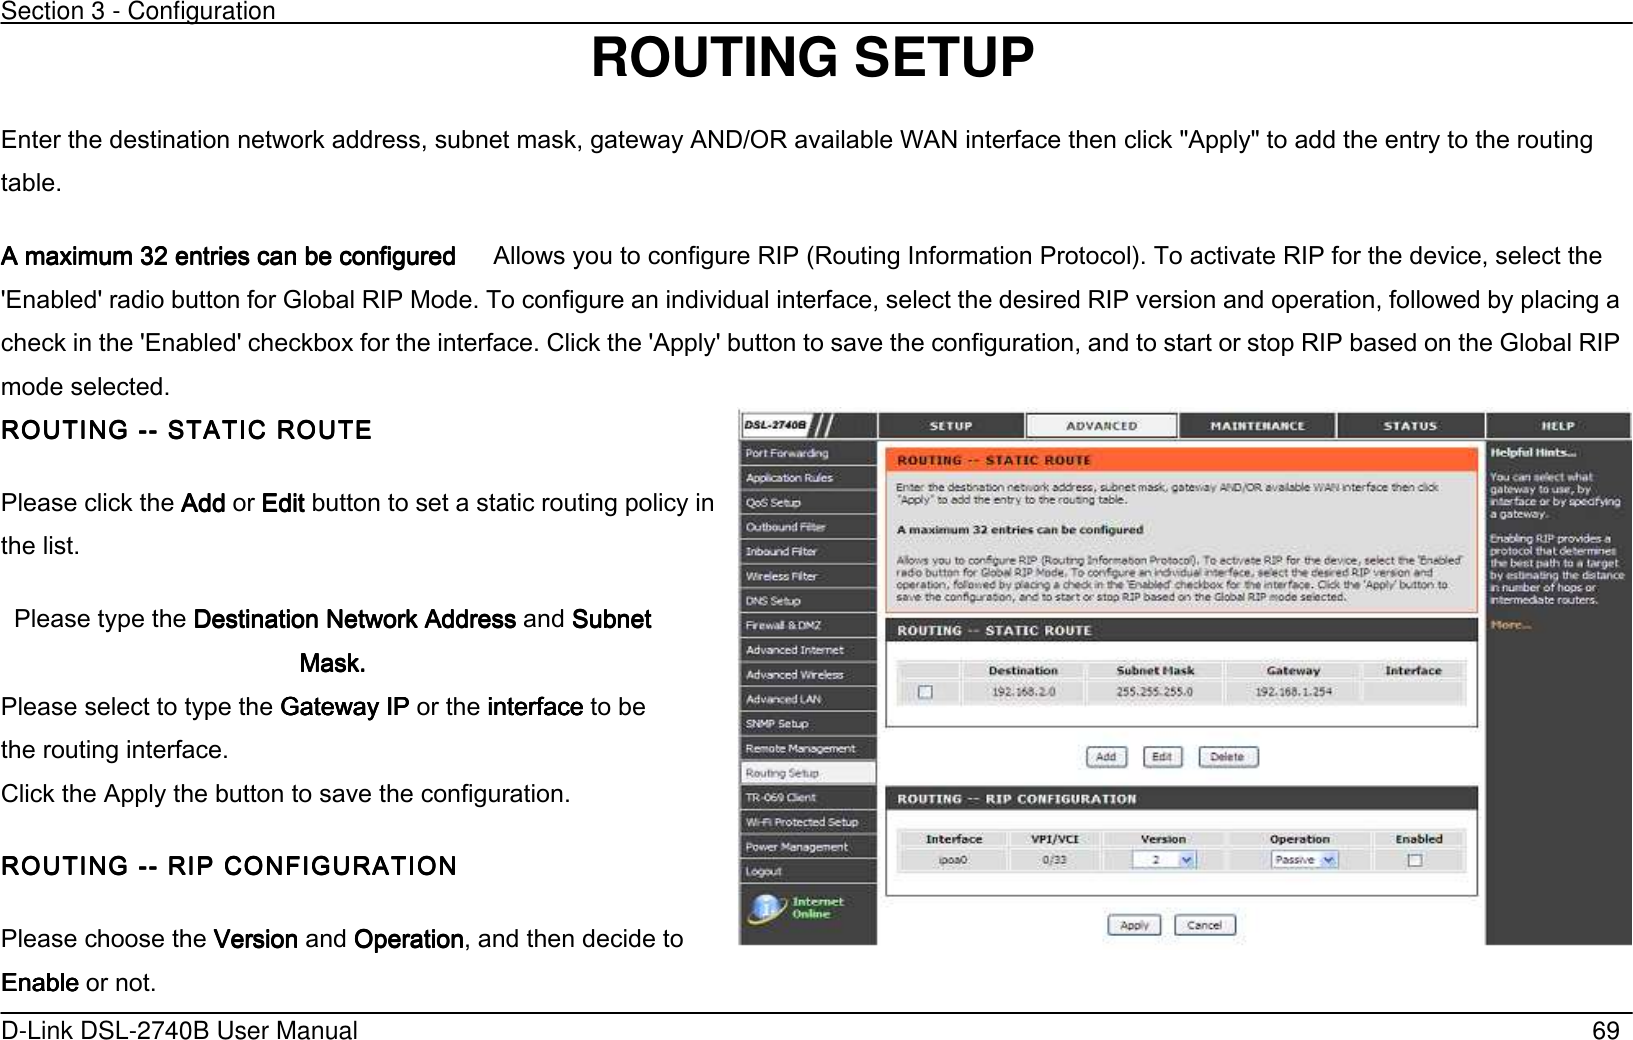 Section 3 - Configuration   D-Link DSL-2740B User Manual                                                  69                          ROUTING SETUP Enter the destination network address, subnet mask, gateway AND/OR available WAN interface then click &quot;Apply&quot; to add the entry to the routing table. A maximum 32 entries can be configuredA maximum 32 entries can be configuredA maximum 32 entries can be configuredA maximum 32 entries can be configured      Allows you to configure RIP (Routing Information Protocol’. To activate RIP for the device, select the &apos;Enabled&apos; radio button for Global RIP Mode. To configure an individual interface, select the desired RIP version and operation, followed by placing a check in the &apos;Enabled&apos; checkbox for the interface. Click the &apos;Apply&apos; button to save the configuration, and to start or stop RIP based on the Global RIP mode selected. ROUTING ROUTING ROUTING ROUTING -------- STATIC ROUTE STATIC ROUTE STATIC ROUTE STATIC ROUTE   Please click the AddAddAddAdd or EditEditEditEdit button to set a static routing policy in the list. Please type the Destination Network AddressDestination Network AddressDestination Network AddressDestination Network Address    and    SubnetSubnetSubnetSubnet    MaskMaskMaskMask....                 Please select to type the Gateway IPGateway IPGateway IPGateway IP or the interfaceinterfaceinterfaceinterface to be the routing interface.   Click the Apply the button to save the configuration. ROUTING ROUTING ROUTING ROUTING -------- RIP CONFIGURATION RIP CONFIGURATION RIP CONFIGURATION RIP CONFIGURATION    Please choose the VersionVersionVersionVersion and OperationOperationOperationOperation, and then decide to EnableEnableEnableEnable or not.  